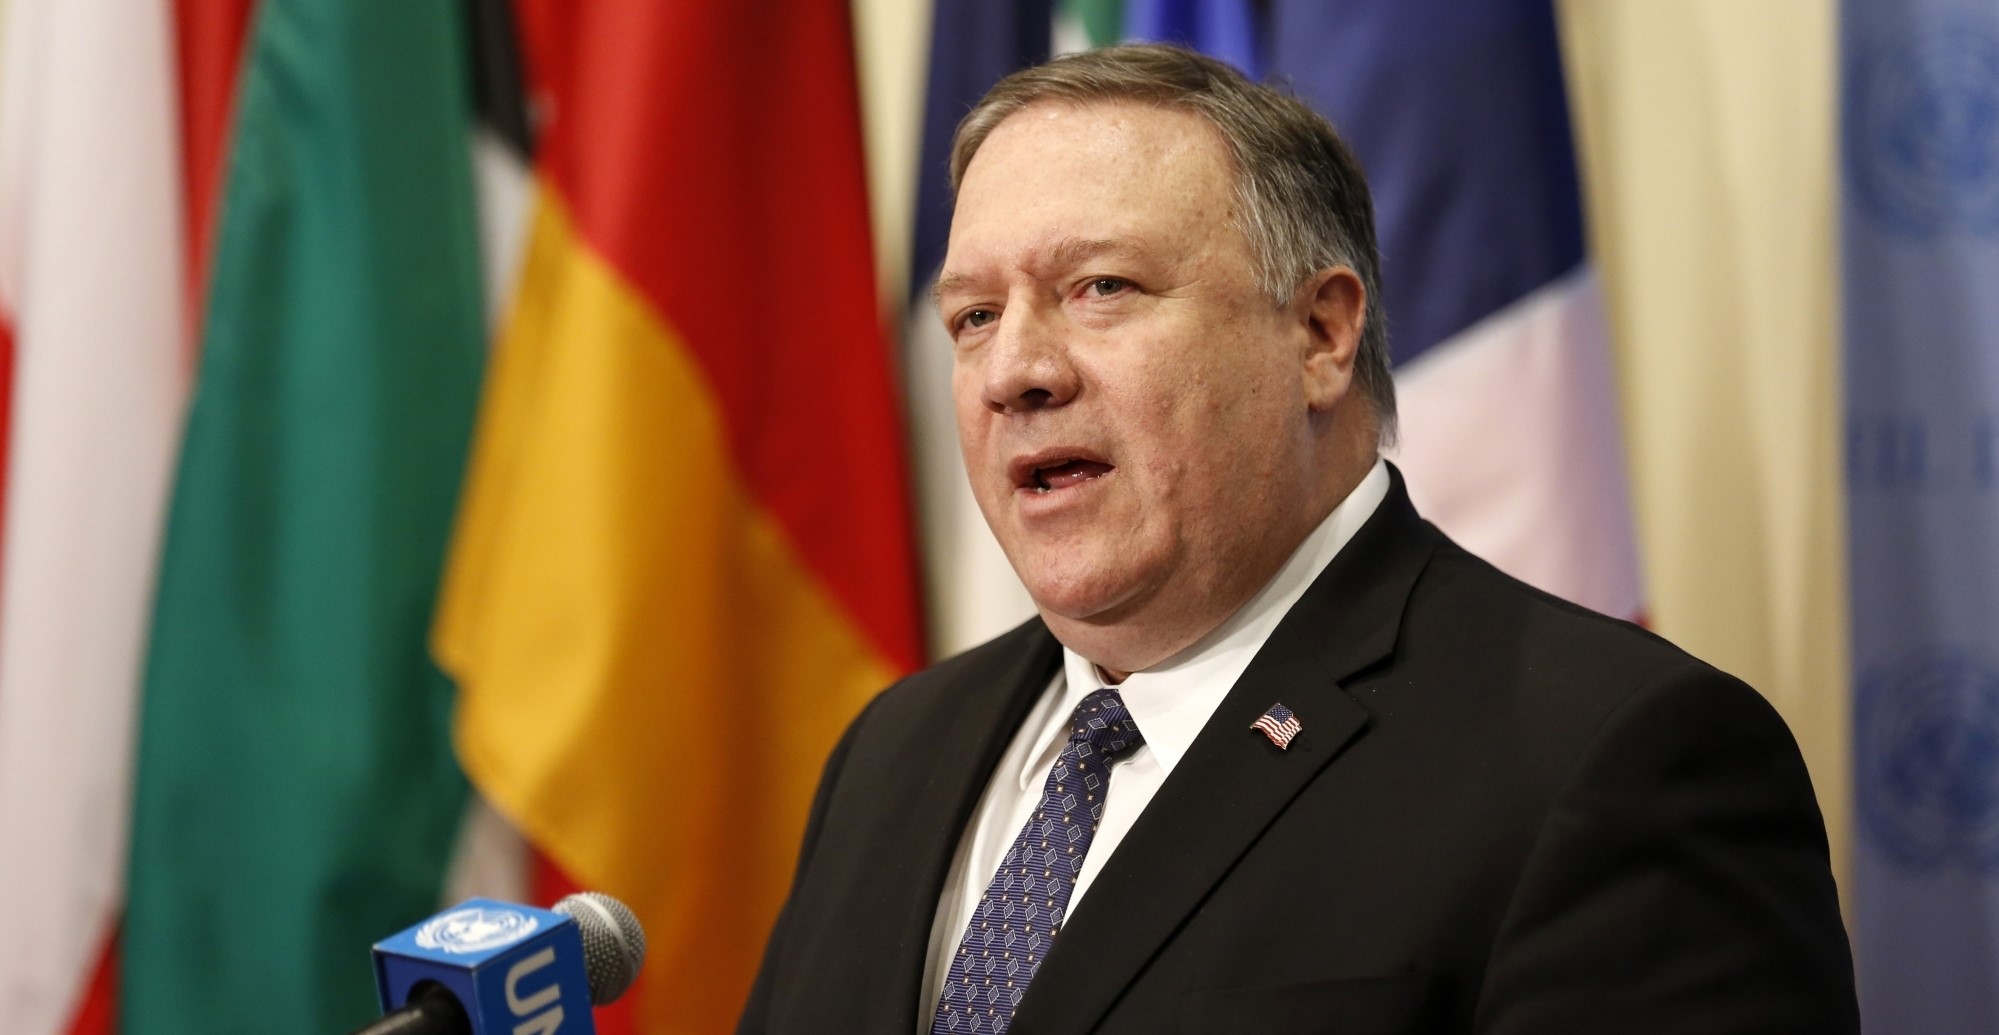 UPDATE 3-U.S. will aim to persuade others to 'call out' China over Uighurs at U.N. - Pompeo